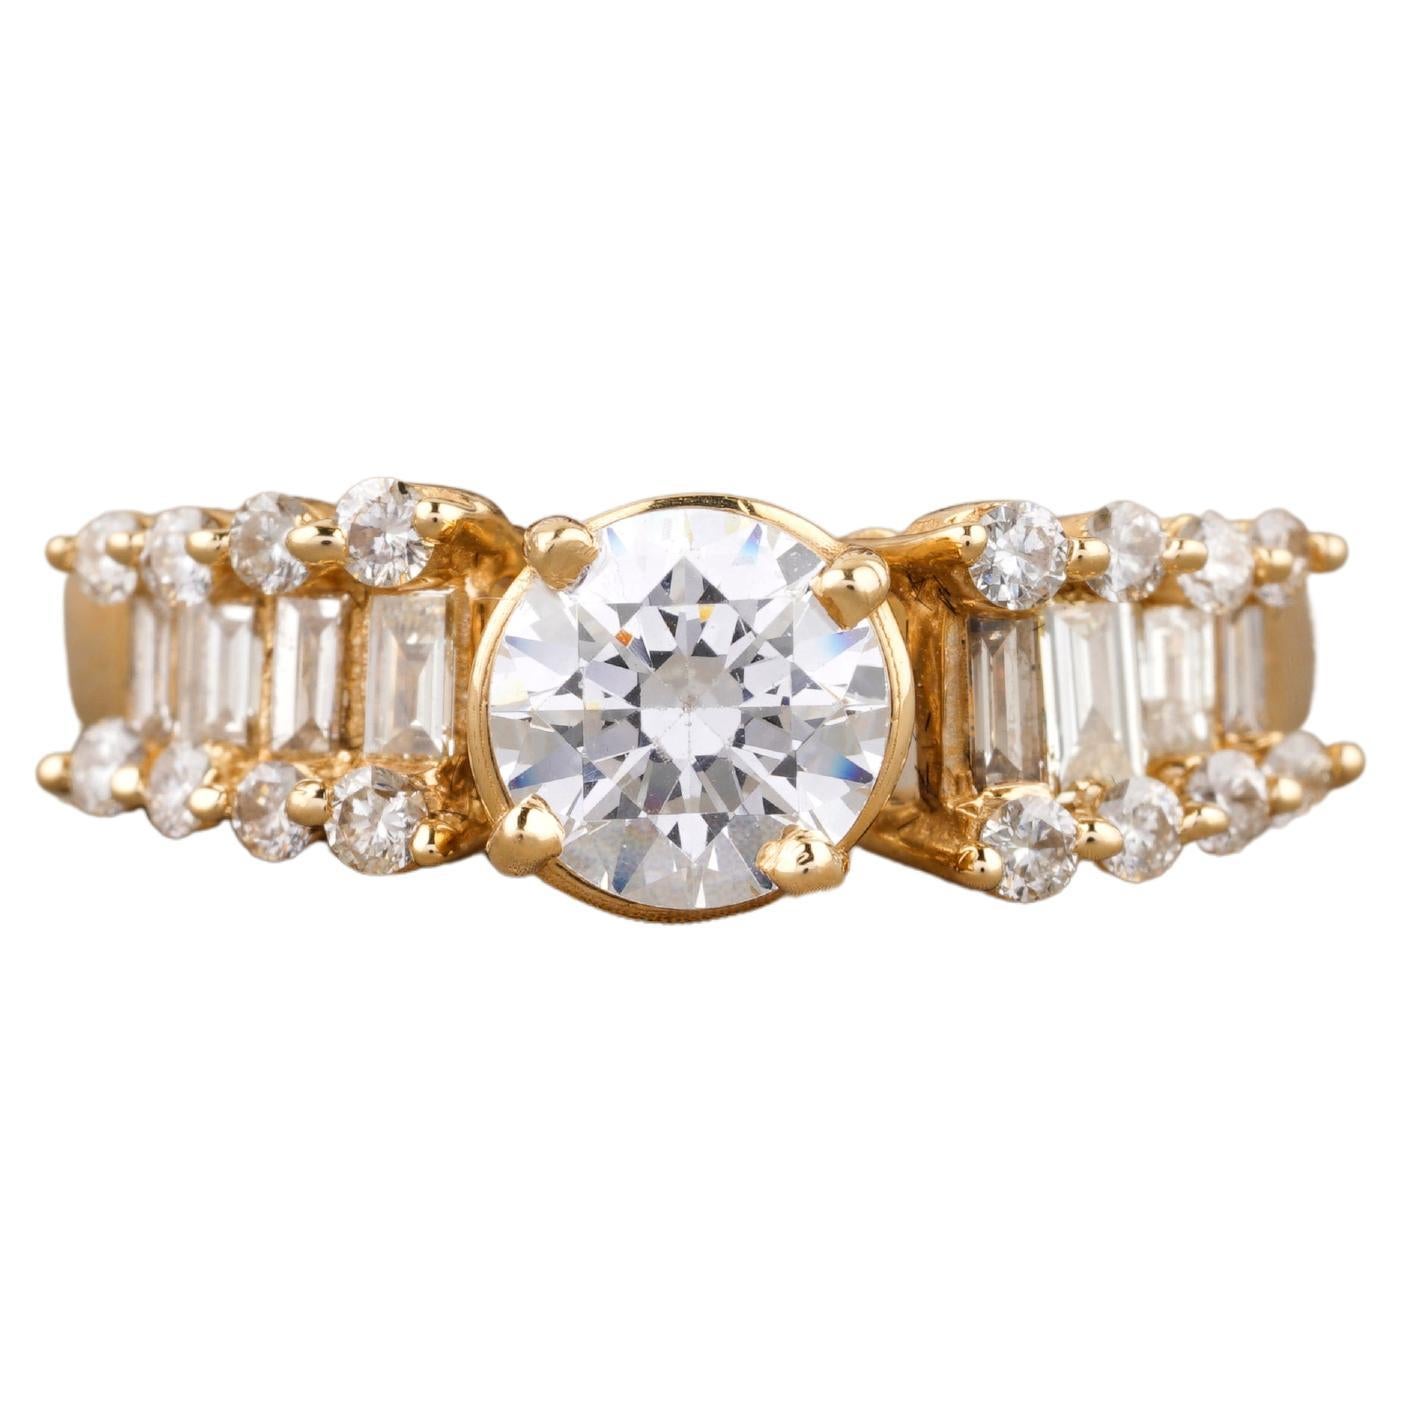 1.5 Carat Round Solitaire Diamond Ring with Baguettes in 18k Solid Gold